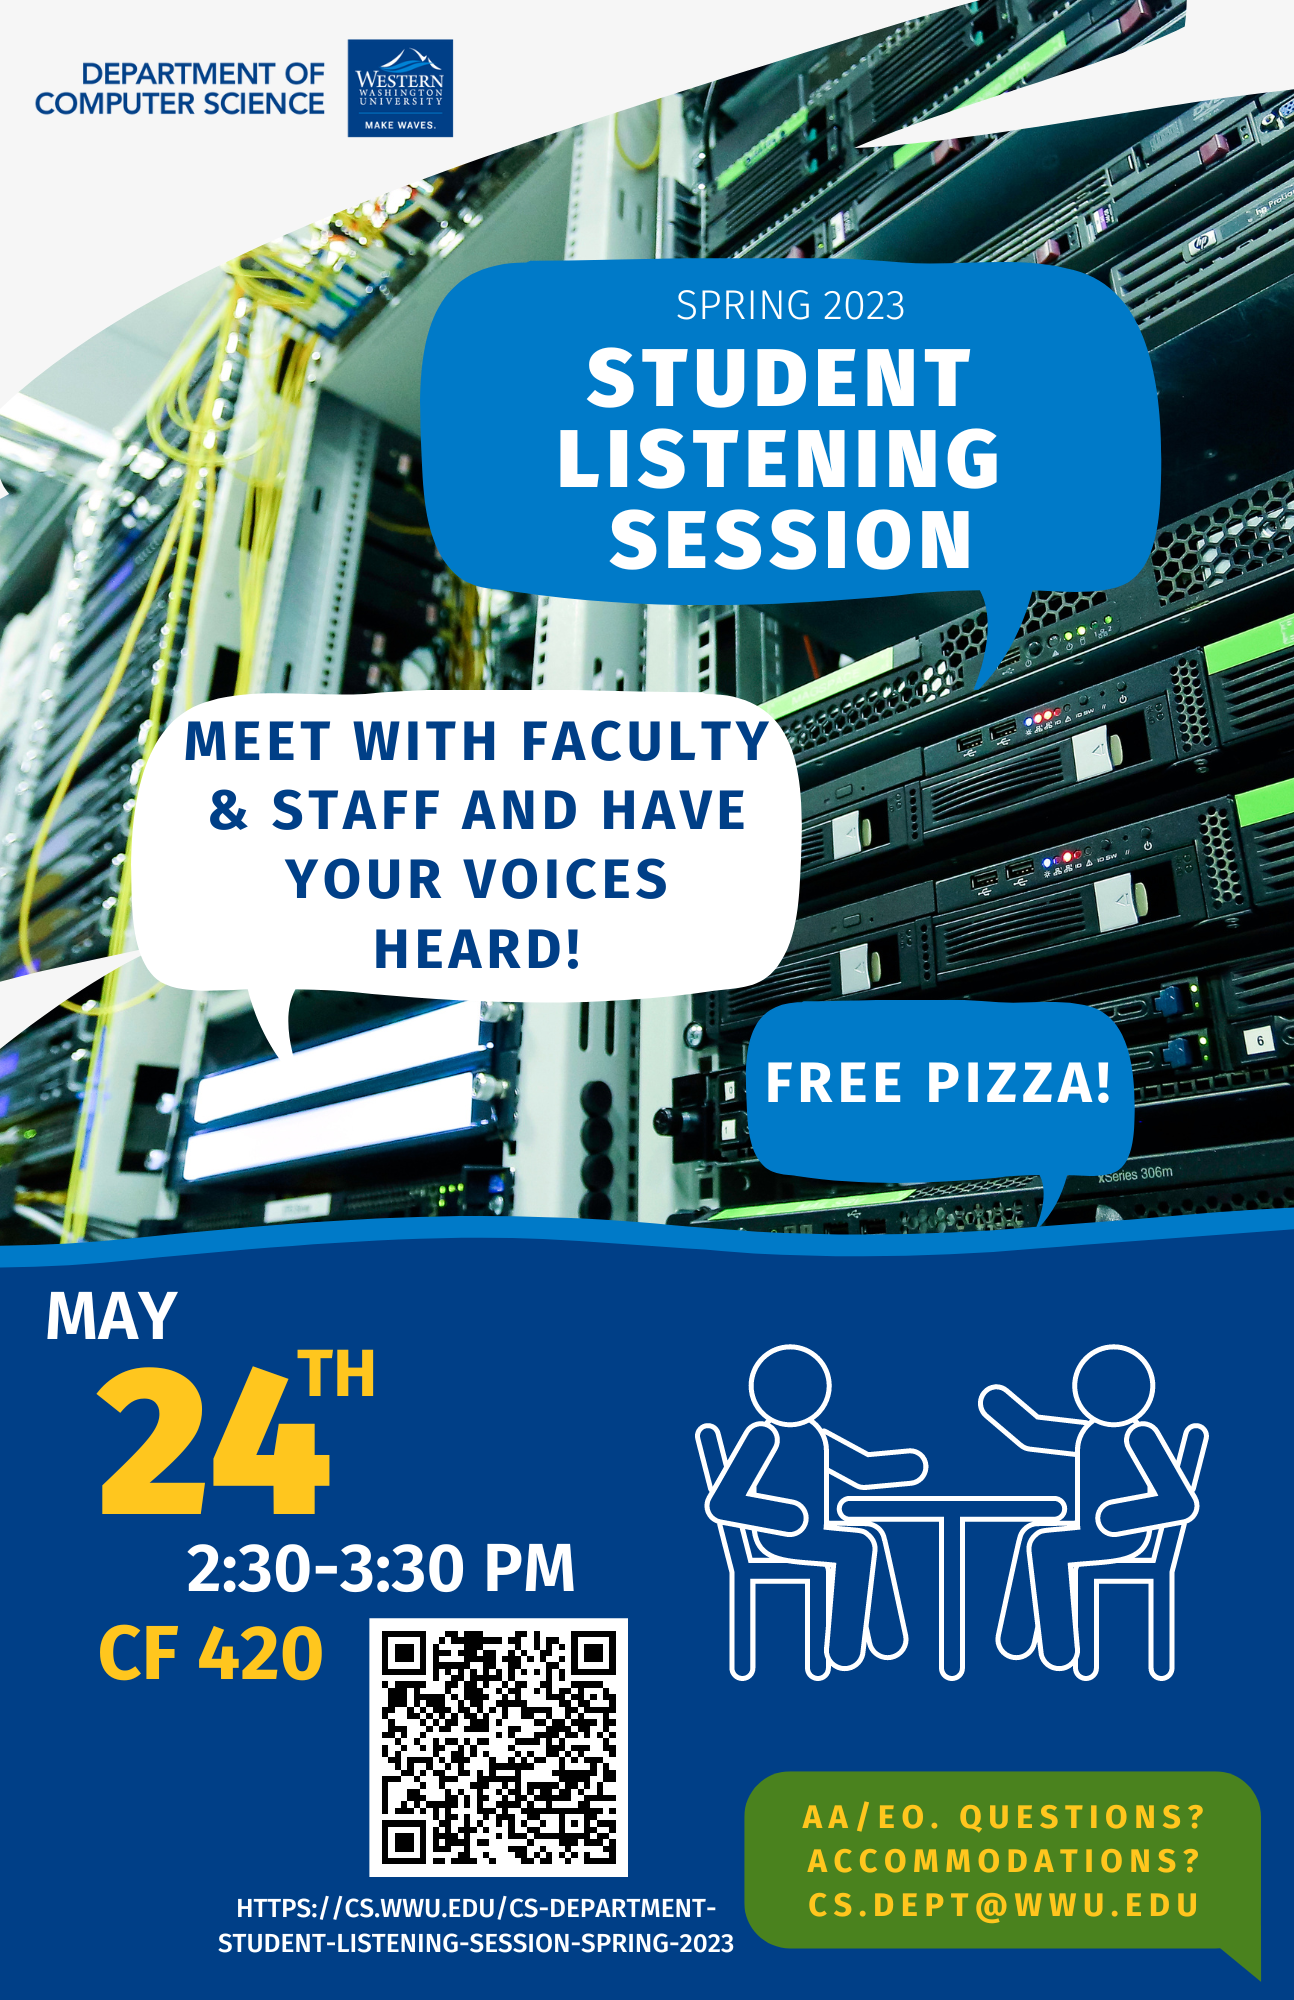 Computer Science Department Student Listening Session. Meet with faculty & staff and have your voices heard! May 24th from 2:30 to 3:30 PM in CF 420.